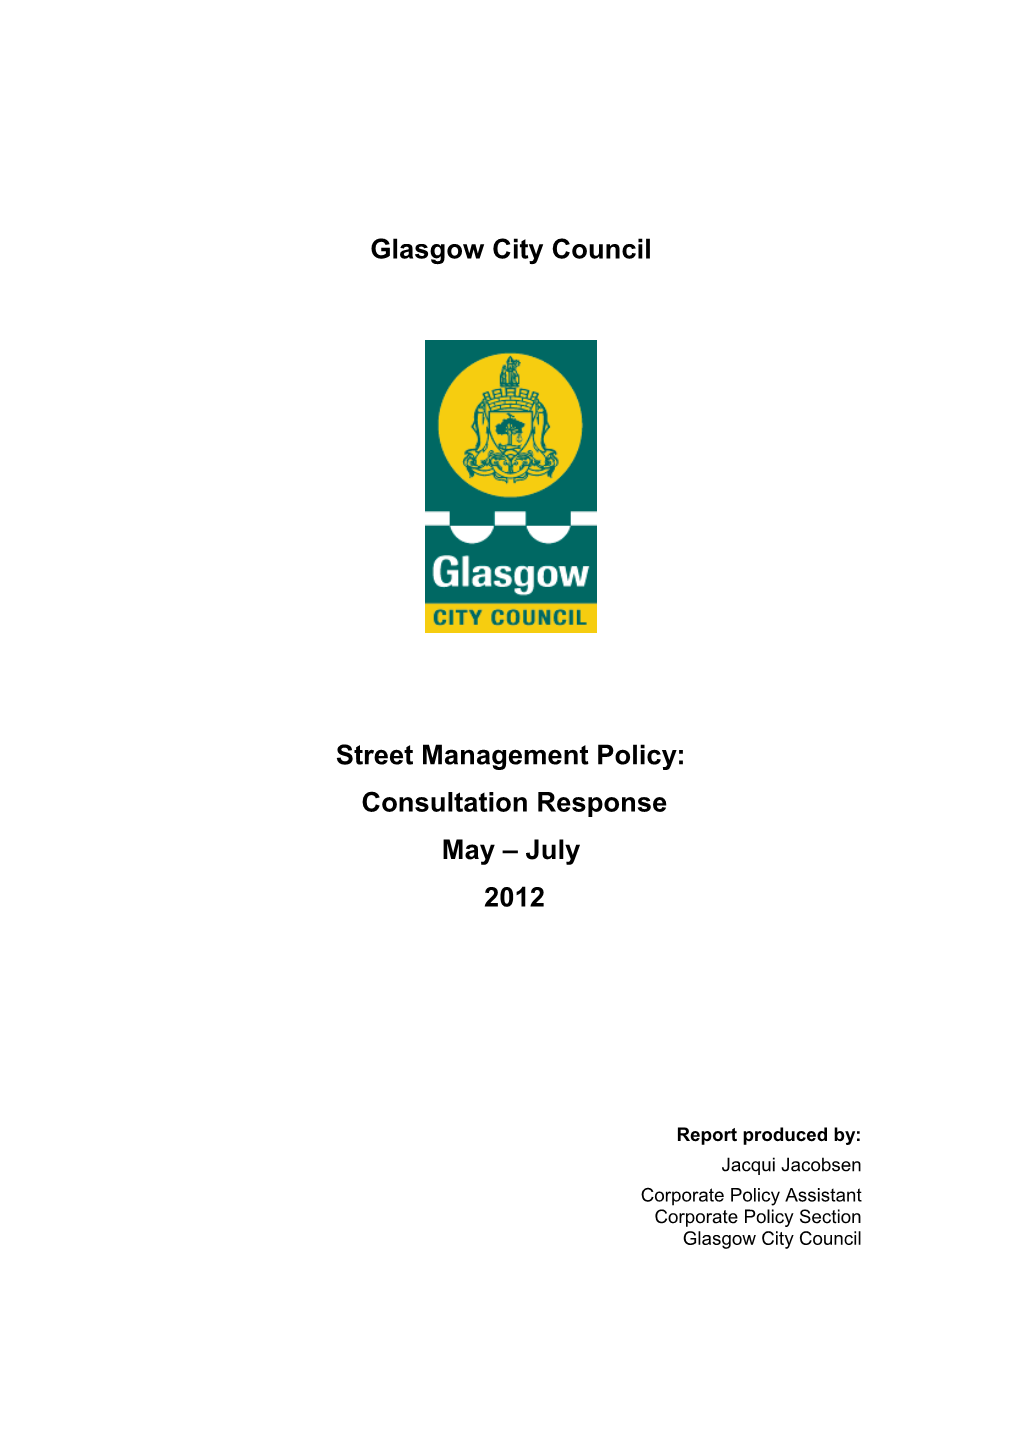 Street Management Policy